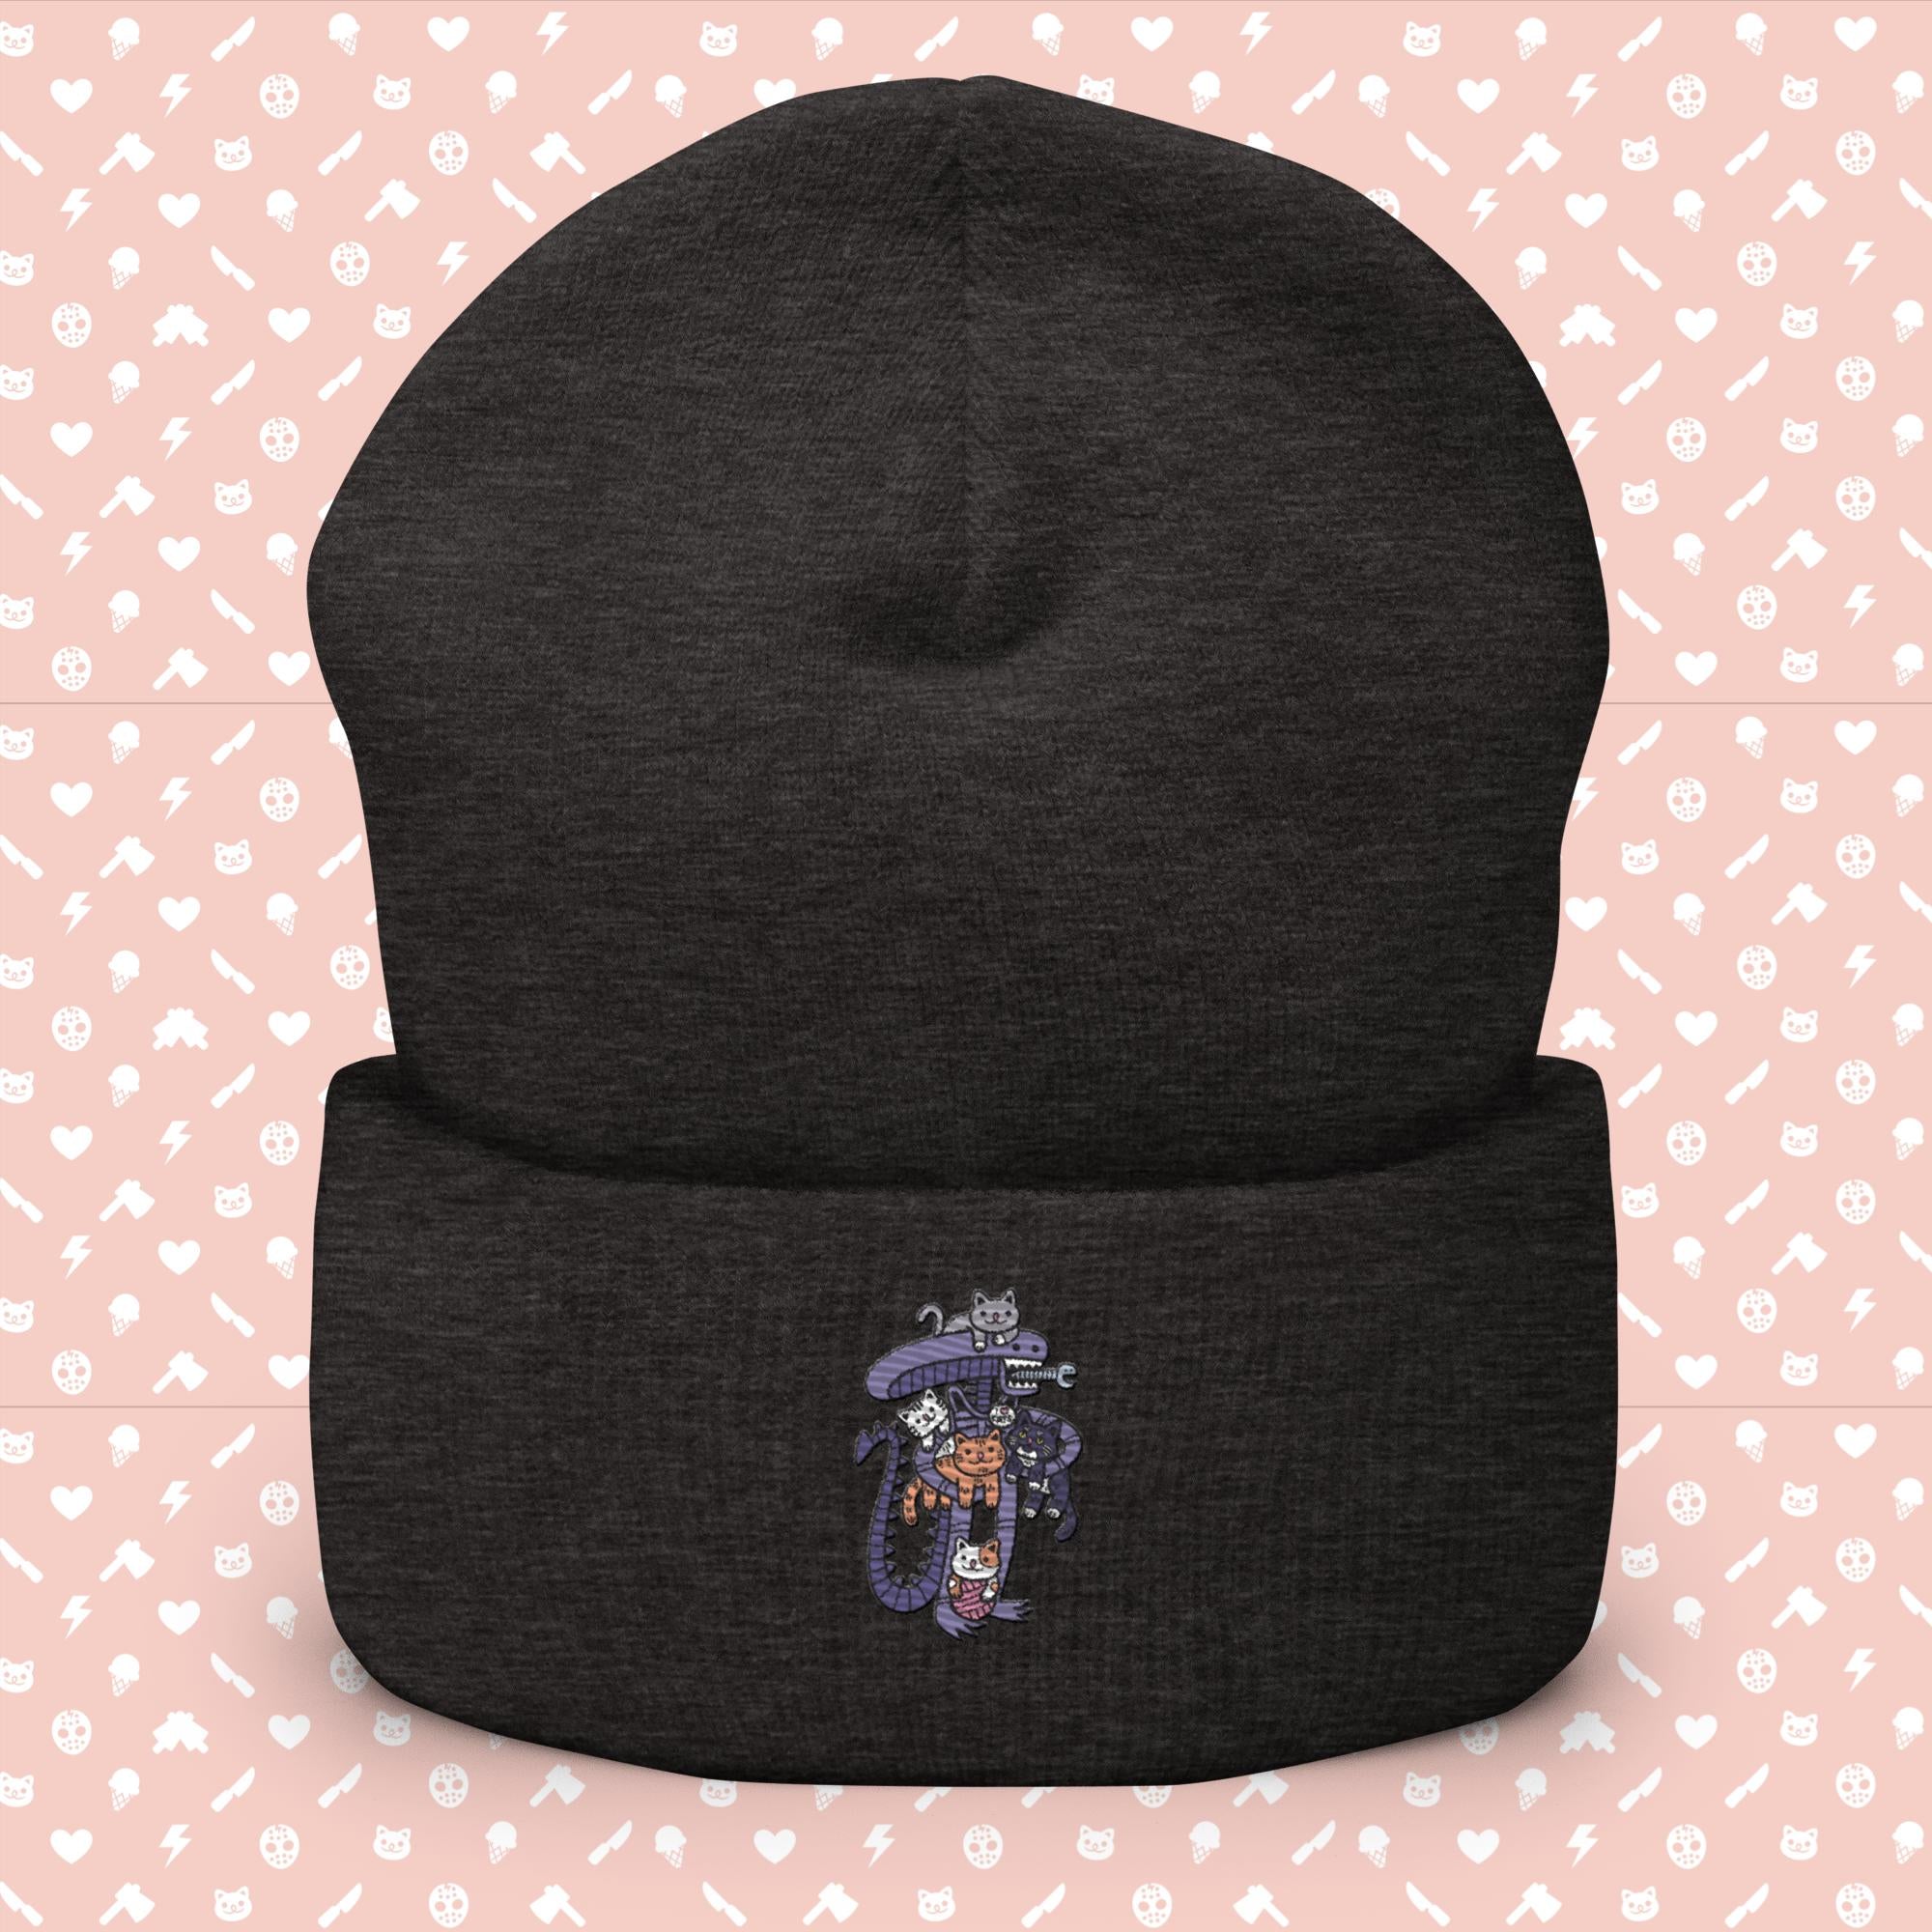 Team Cats Alien Embroidered Cuffed Beanie